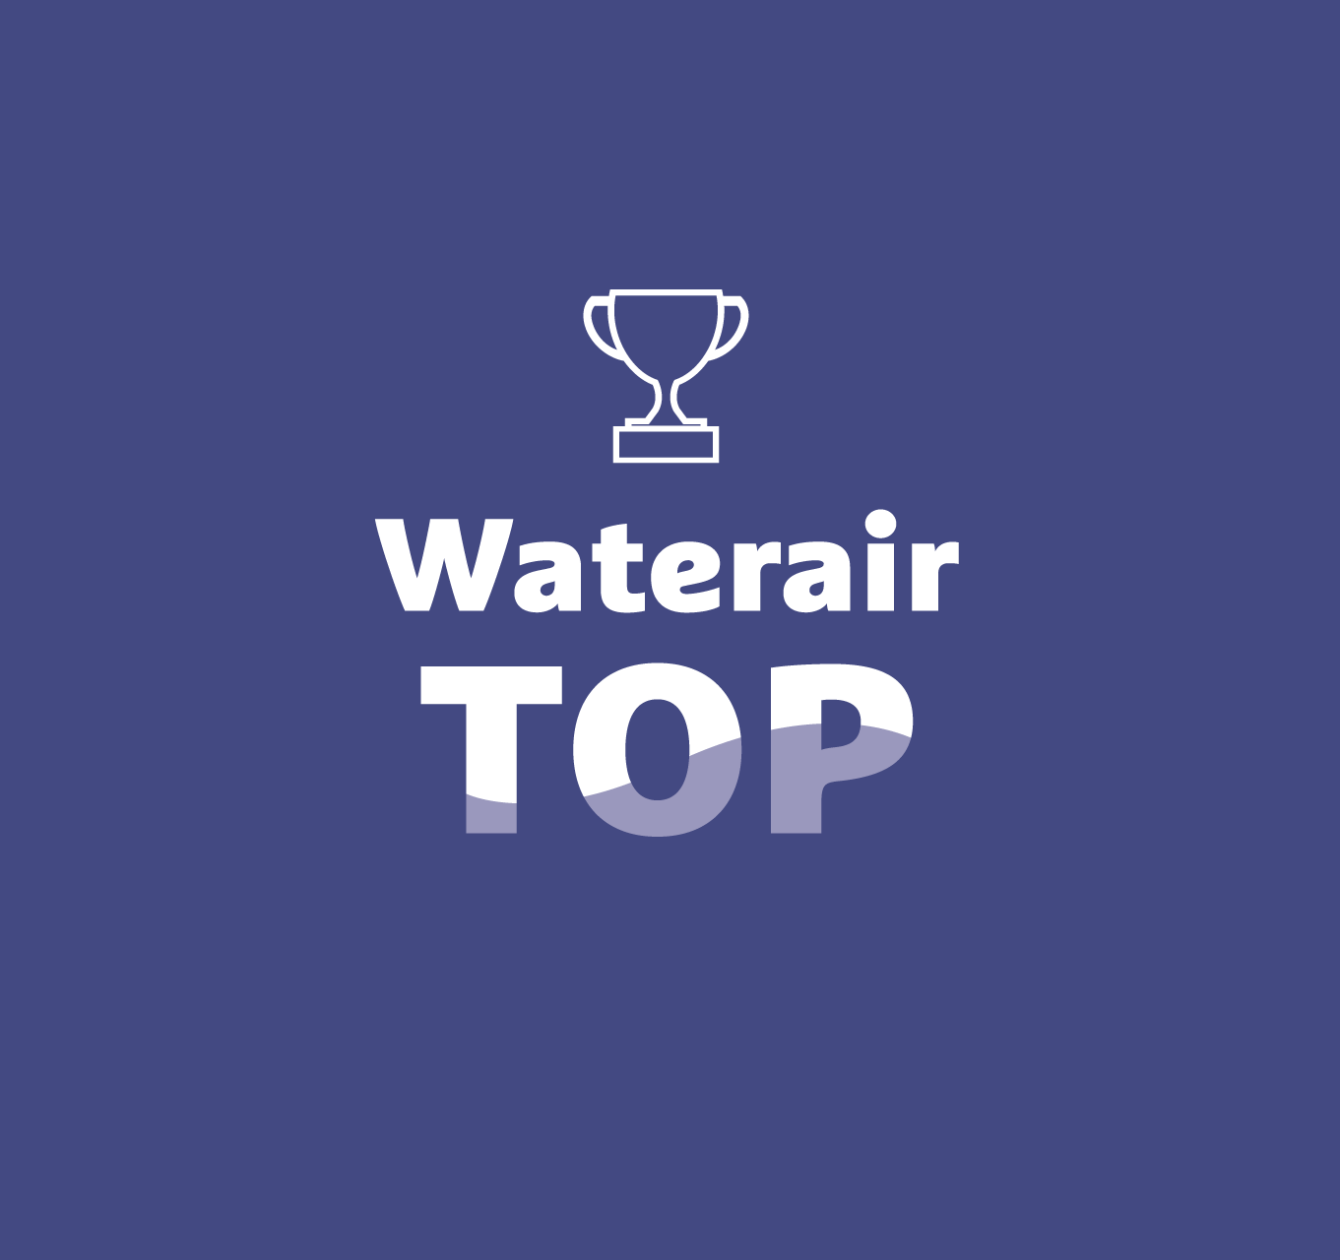 Discover the Waterair Top package